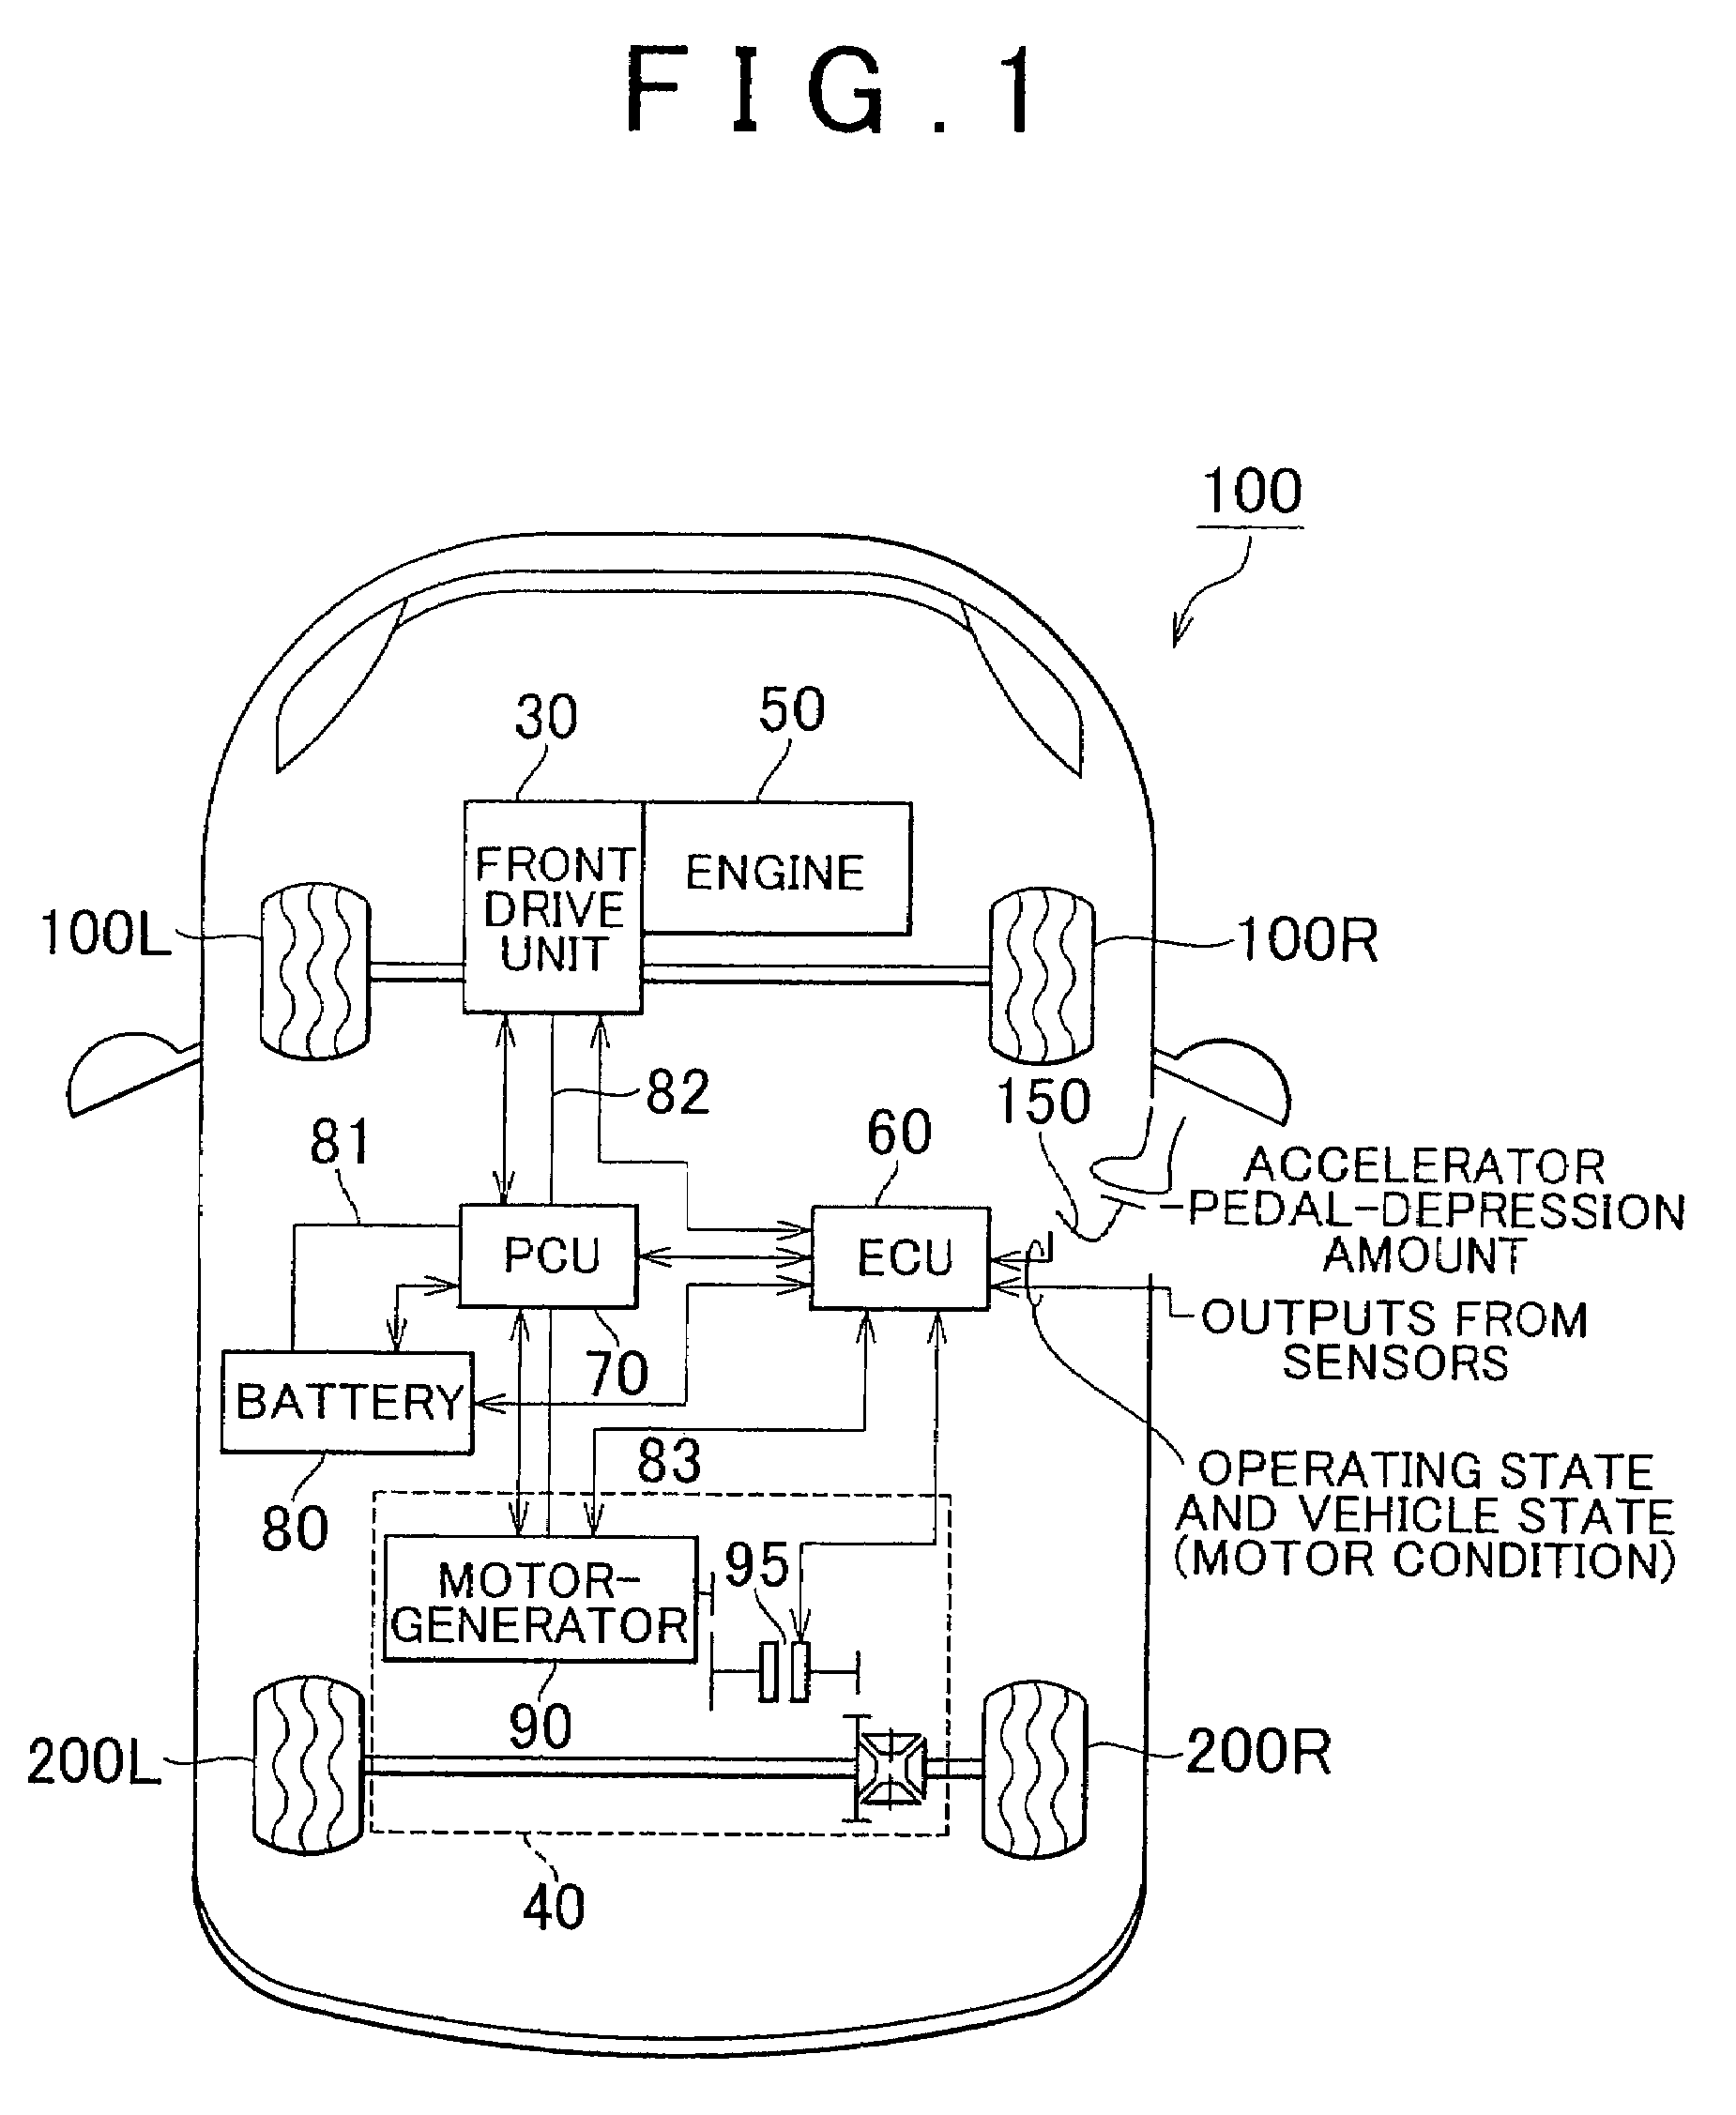 Drive apparatus for electric vehicle